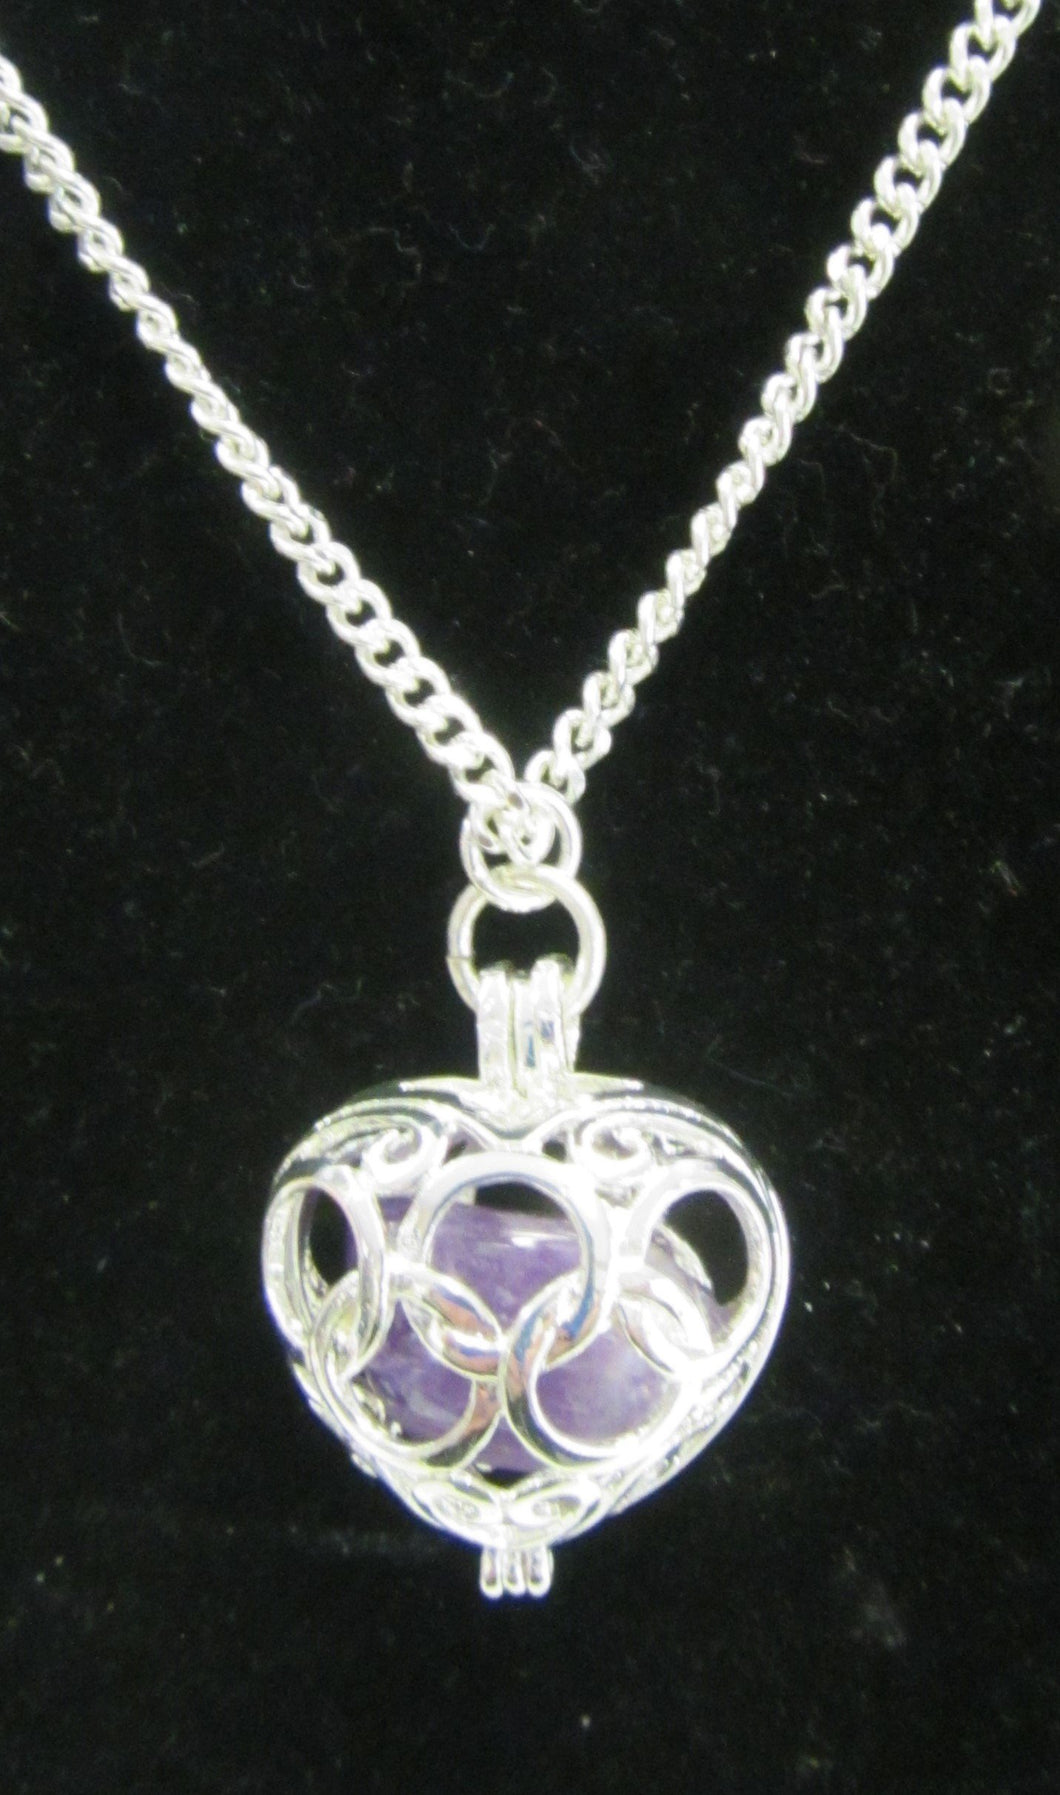 Beautiful handcrafted silver plated necklace with amethyst stone enclosed in the heart